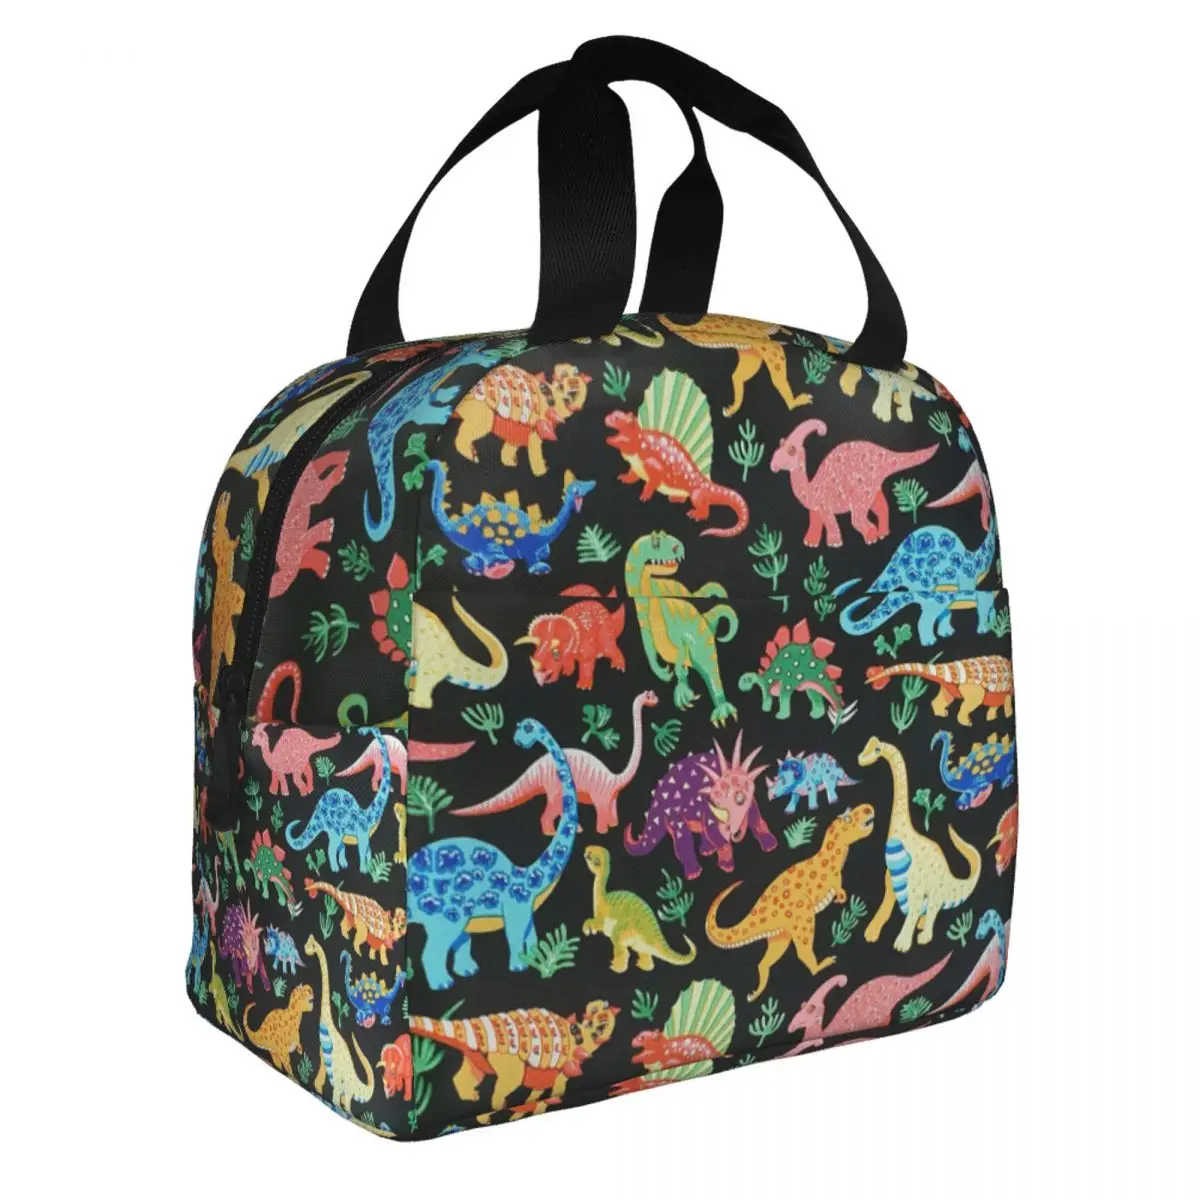 Colorful Dinosaur Insulated Lunch Bag Leakproof Thermal Cooler  Animal Print Bento Box for Women Kids School Picnic Lunch Tote